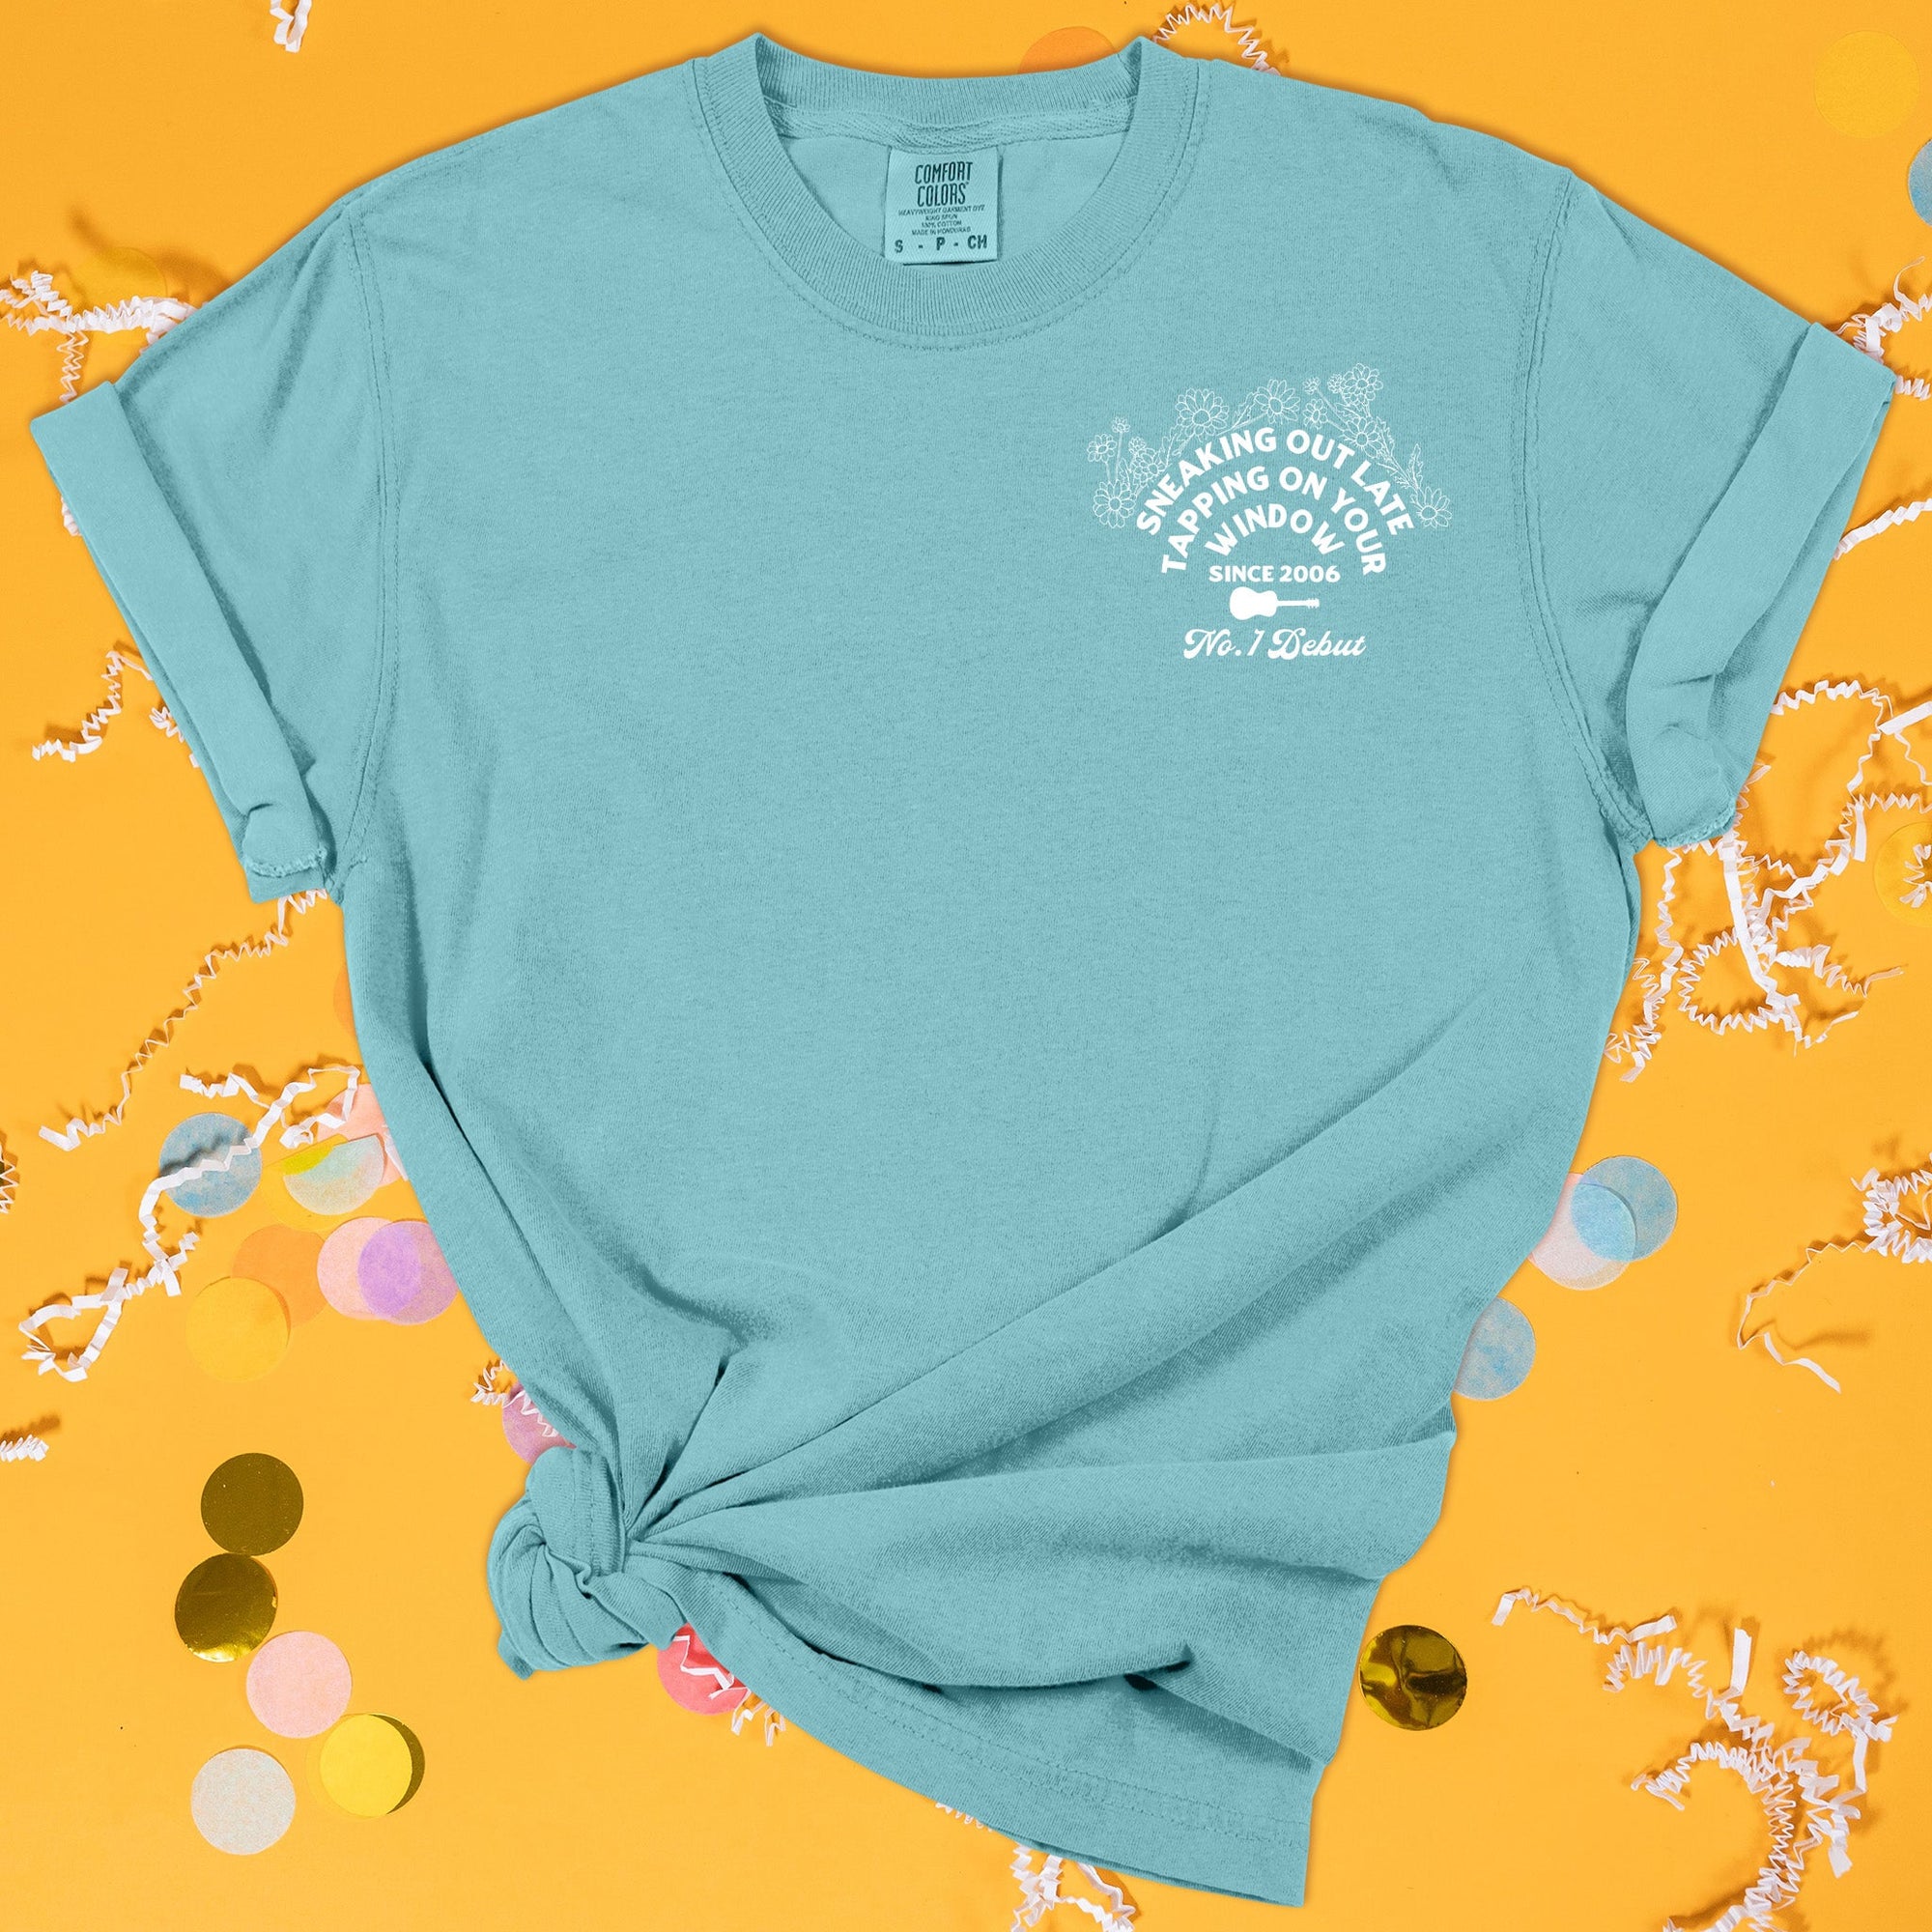 On a sunny mustard background sits the front of a t-shirt with white crinkle and big, colorful confetti scattered around. This Taylor Swift Inspired Reputation tee is aqua with white lettering and illustration. There is a guitar with flowers and it says "SNEAKING OUT LATE TAPPING ON YOUR WINDOW SINCE 2006" and "No. 1 Debut."